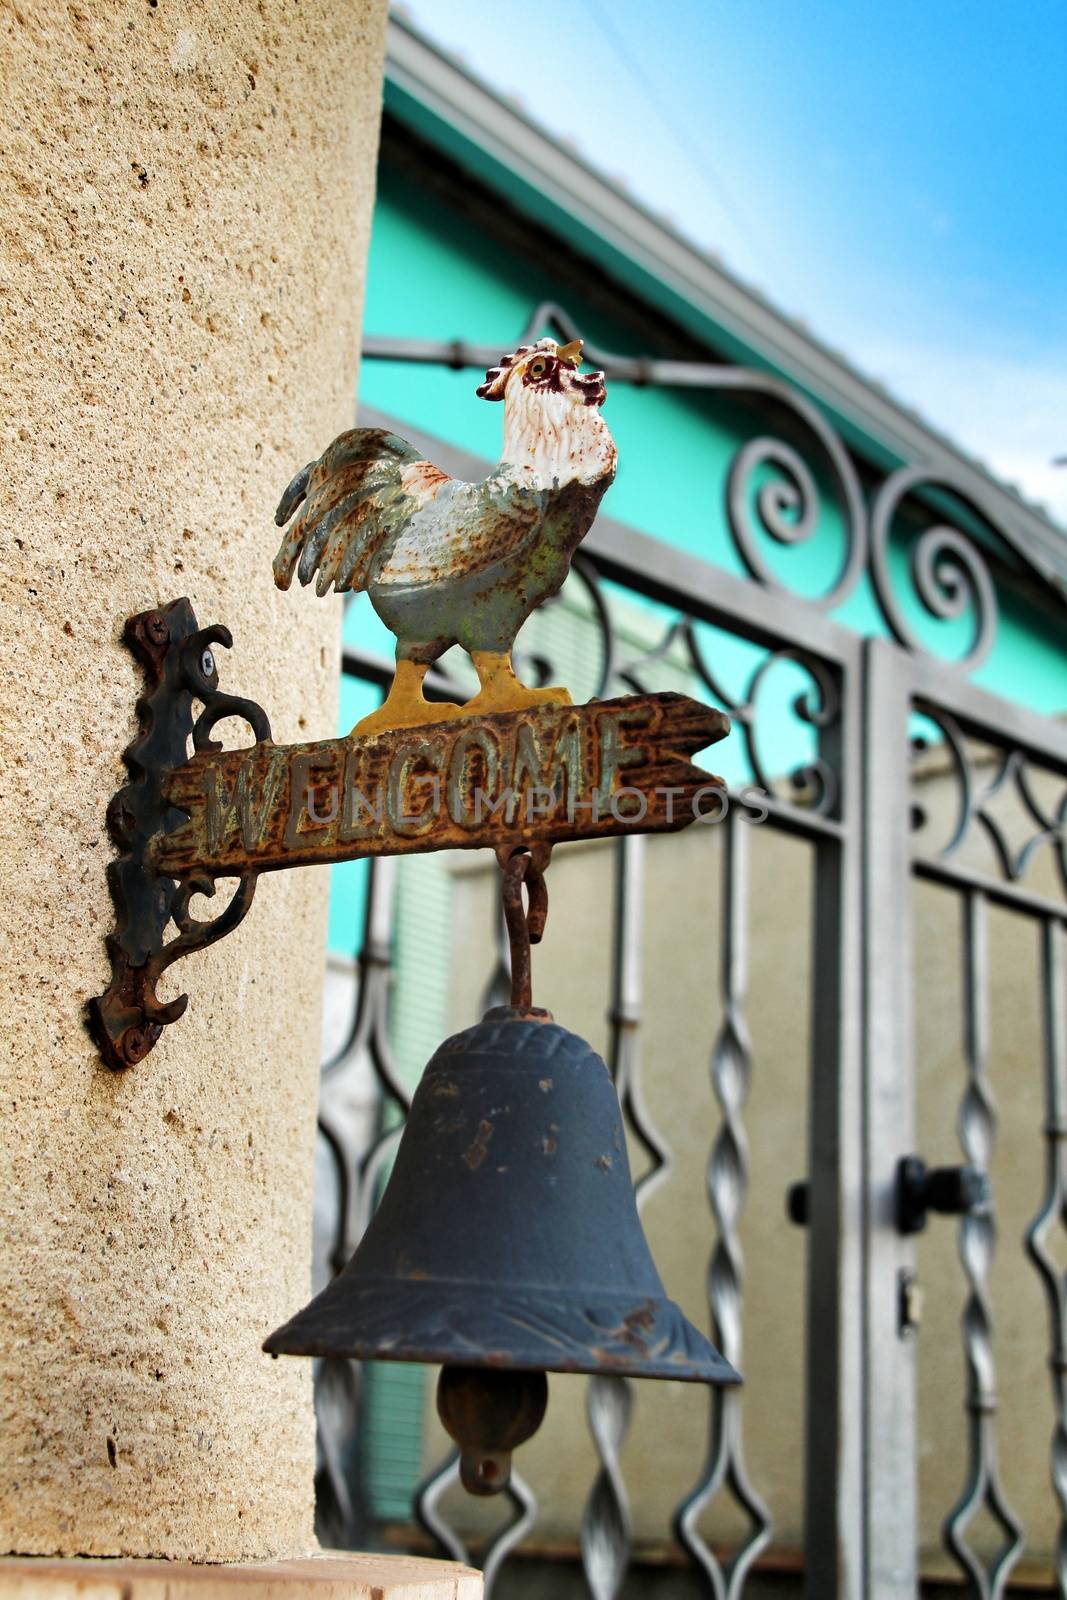 Iron bell doorbell with a rooster at the entrance of a house with a forged metal door